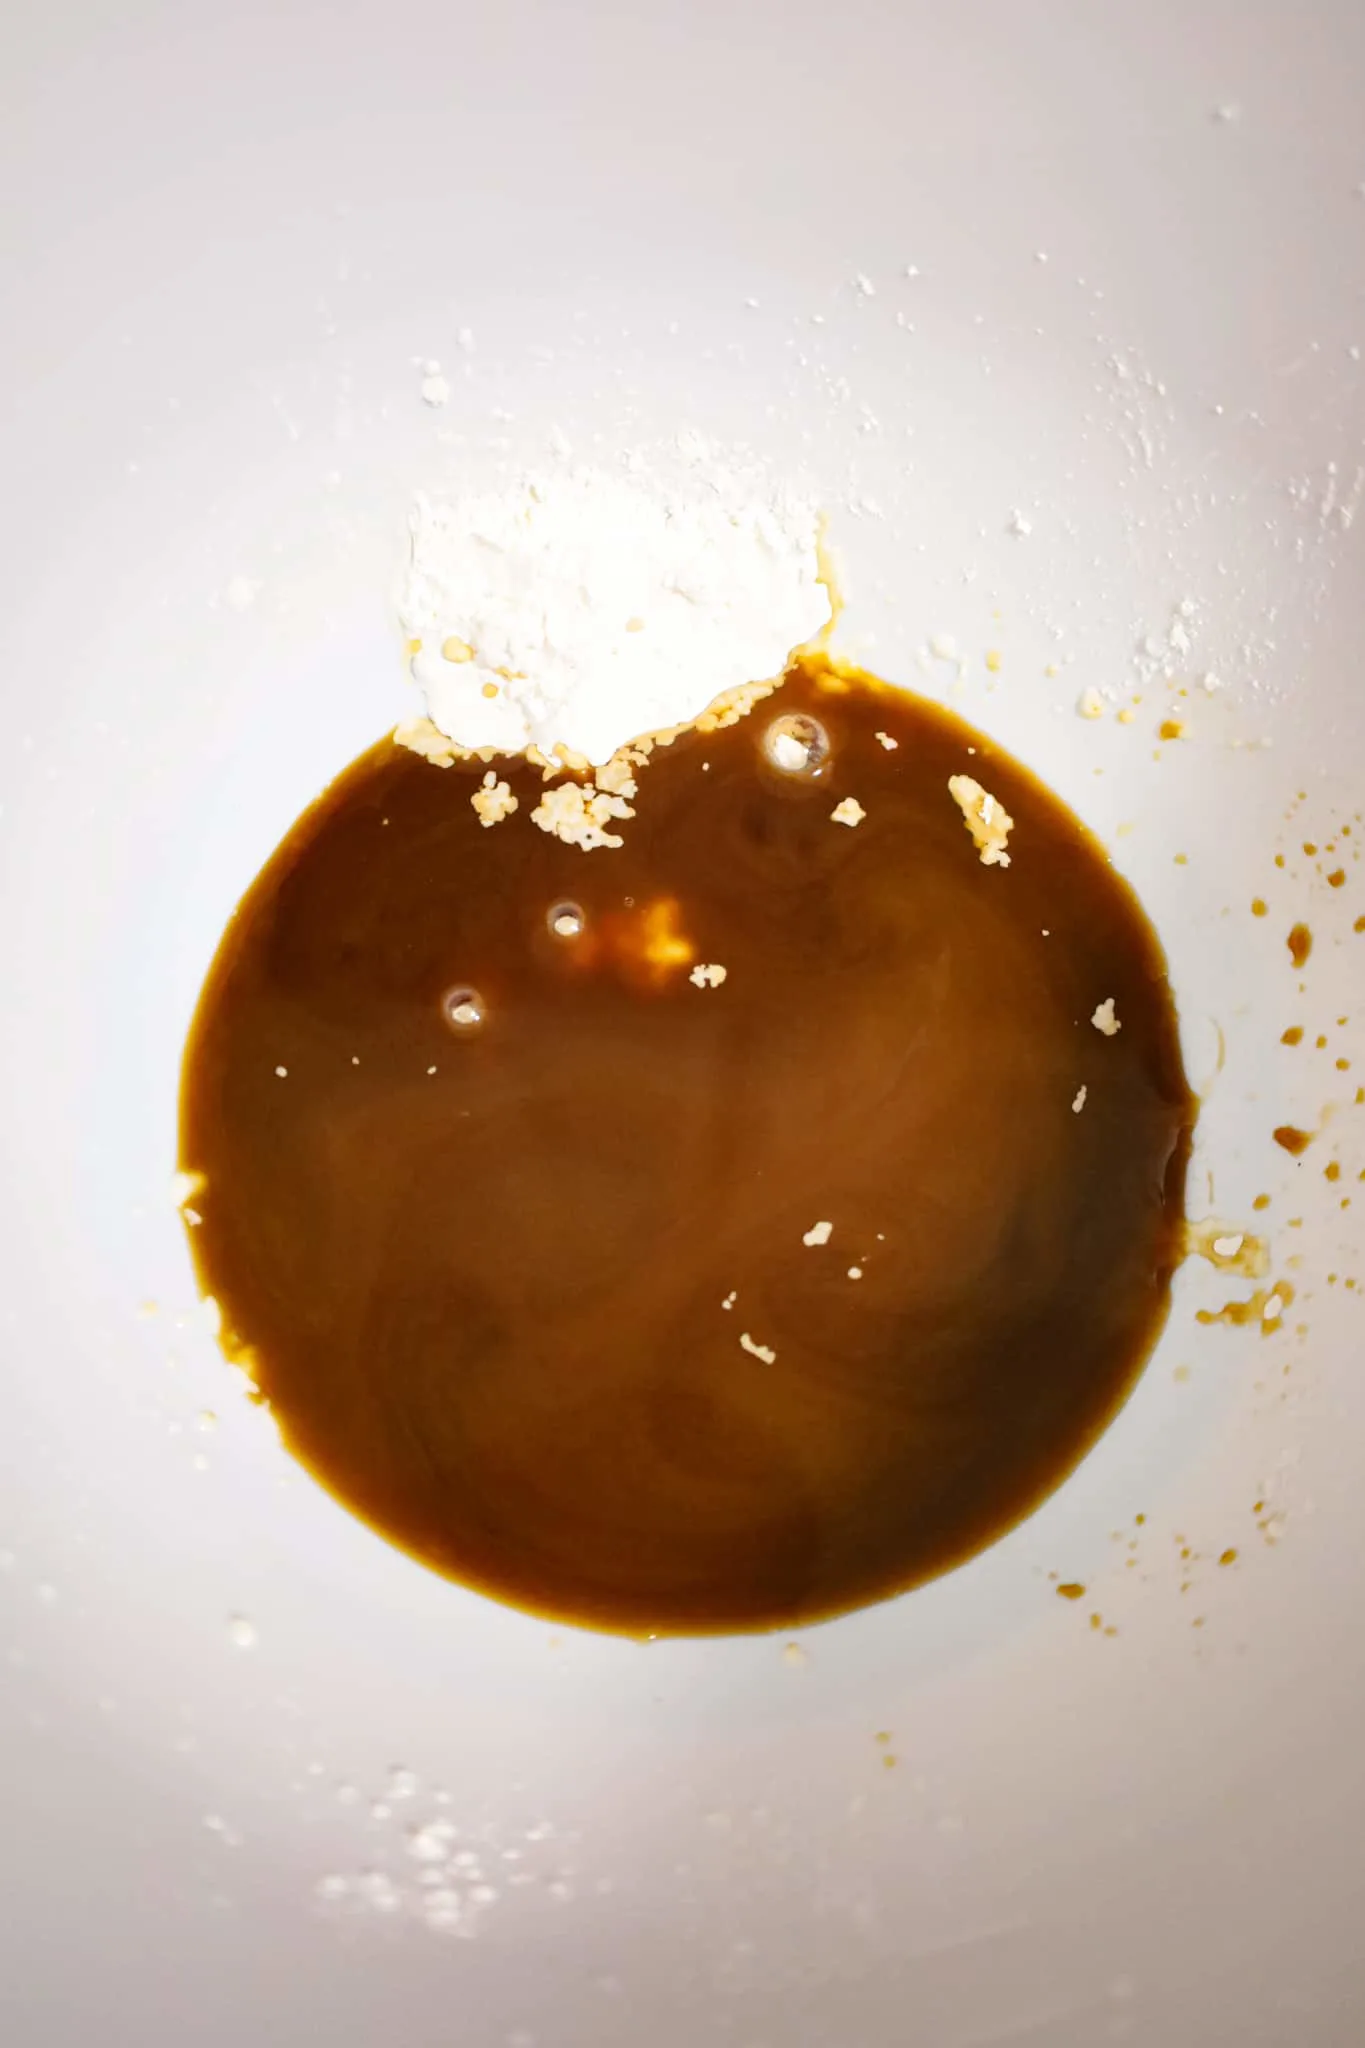 corn starch and soy sauce in a mixing bowl